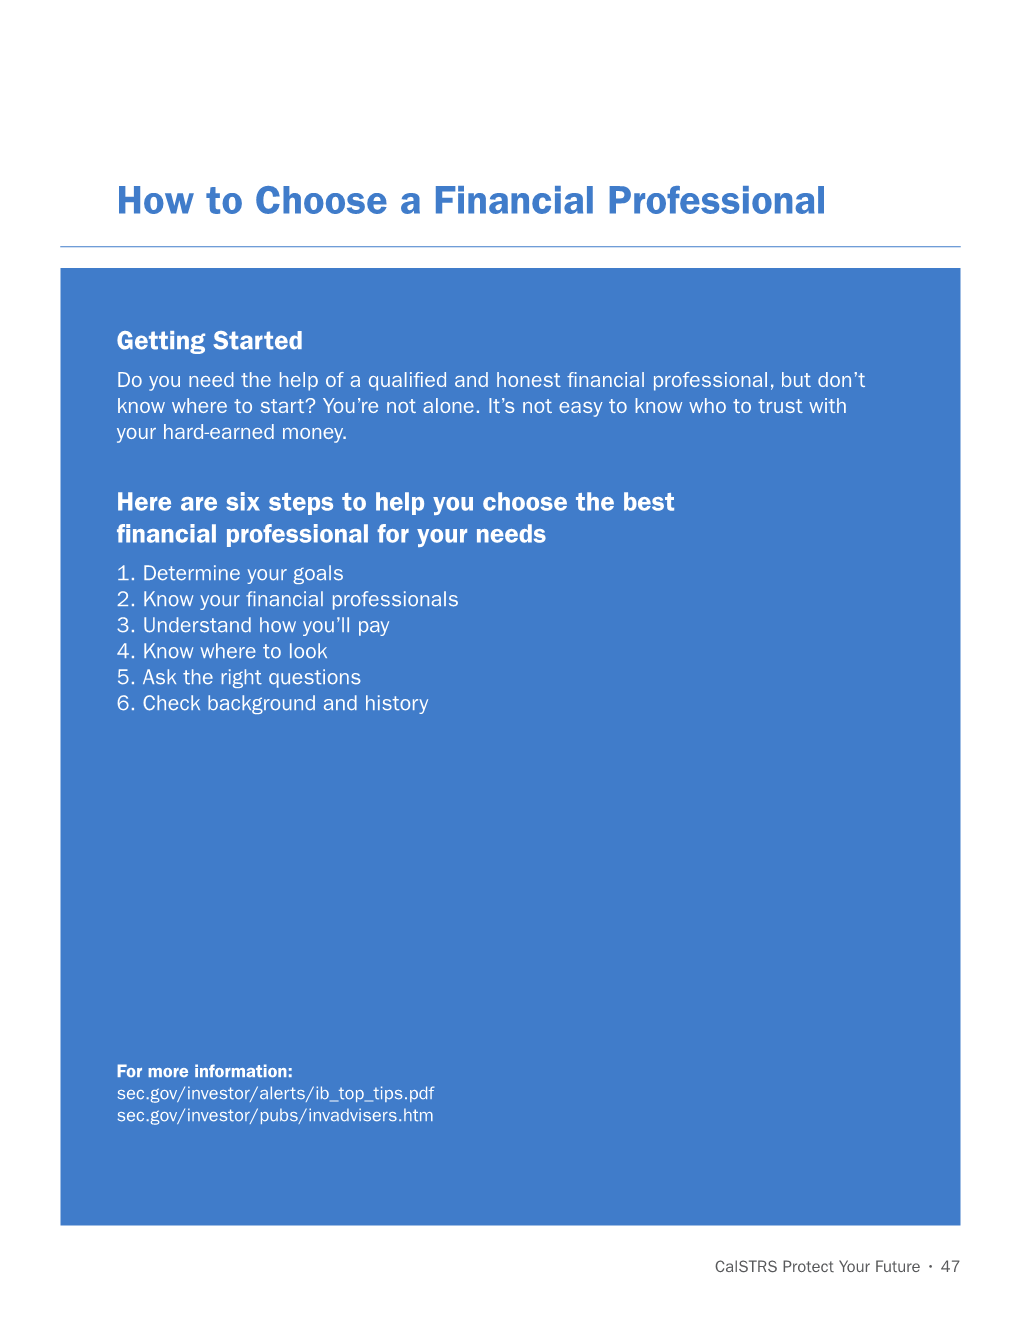 How to Choose a Financial Professional